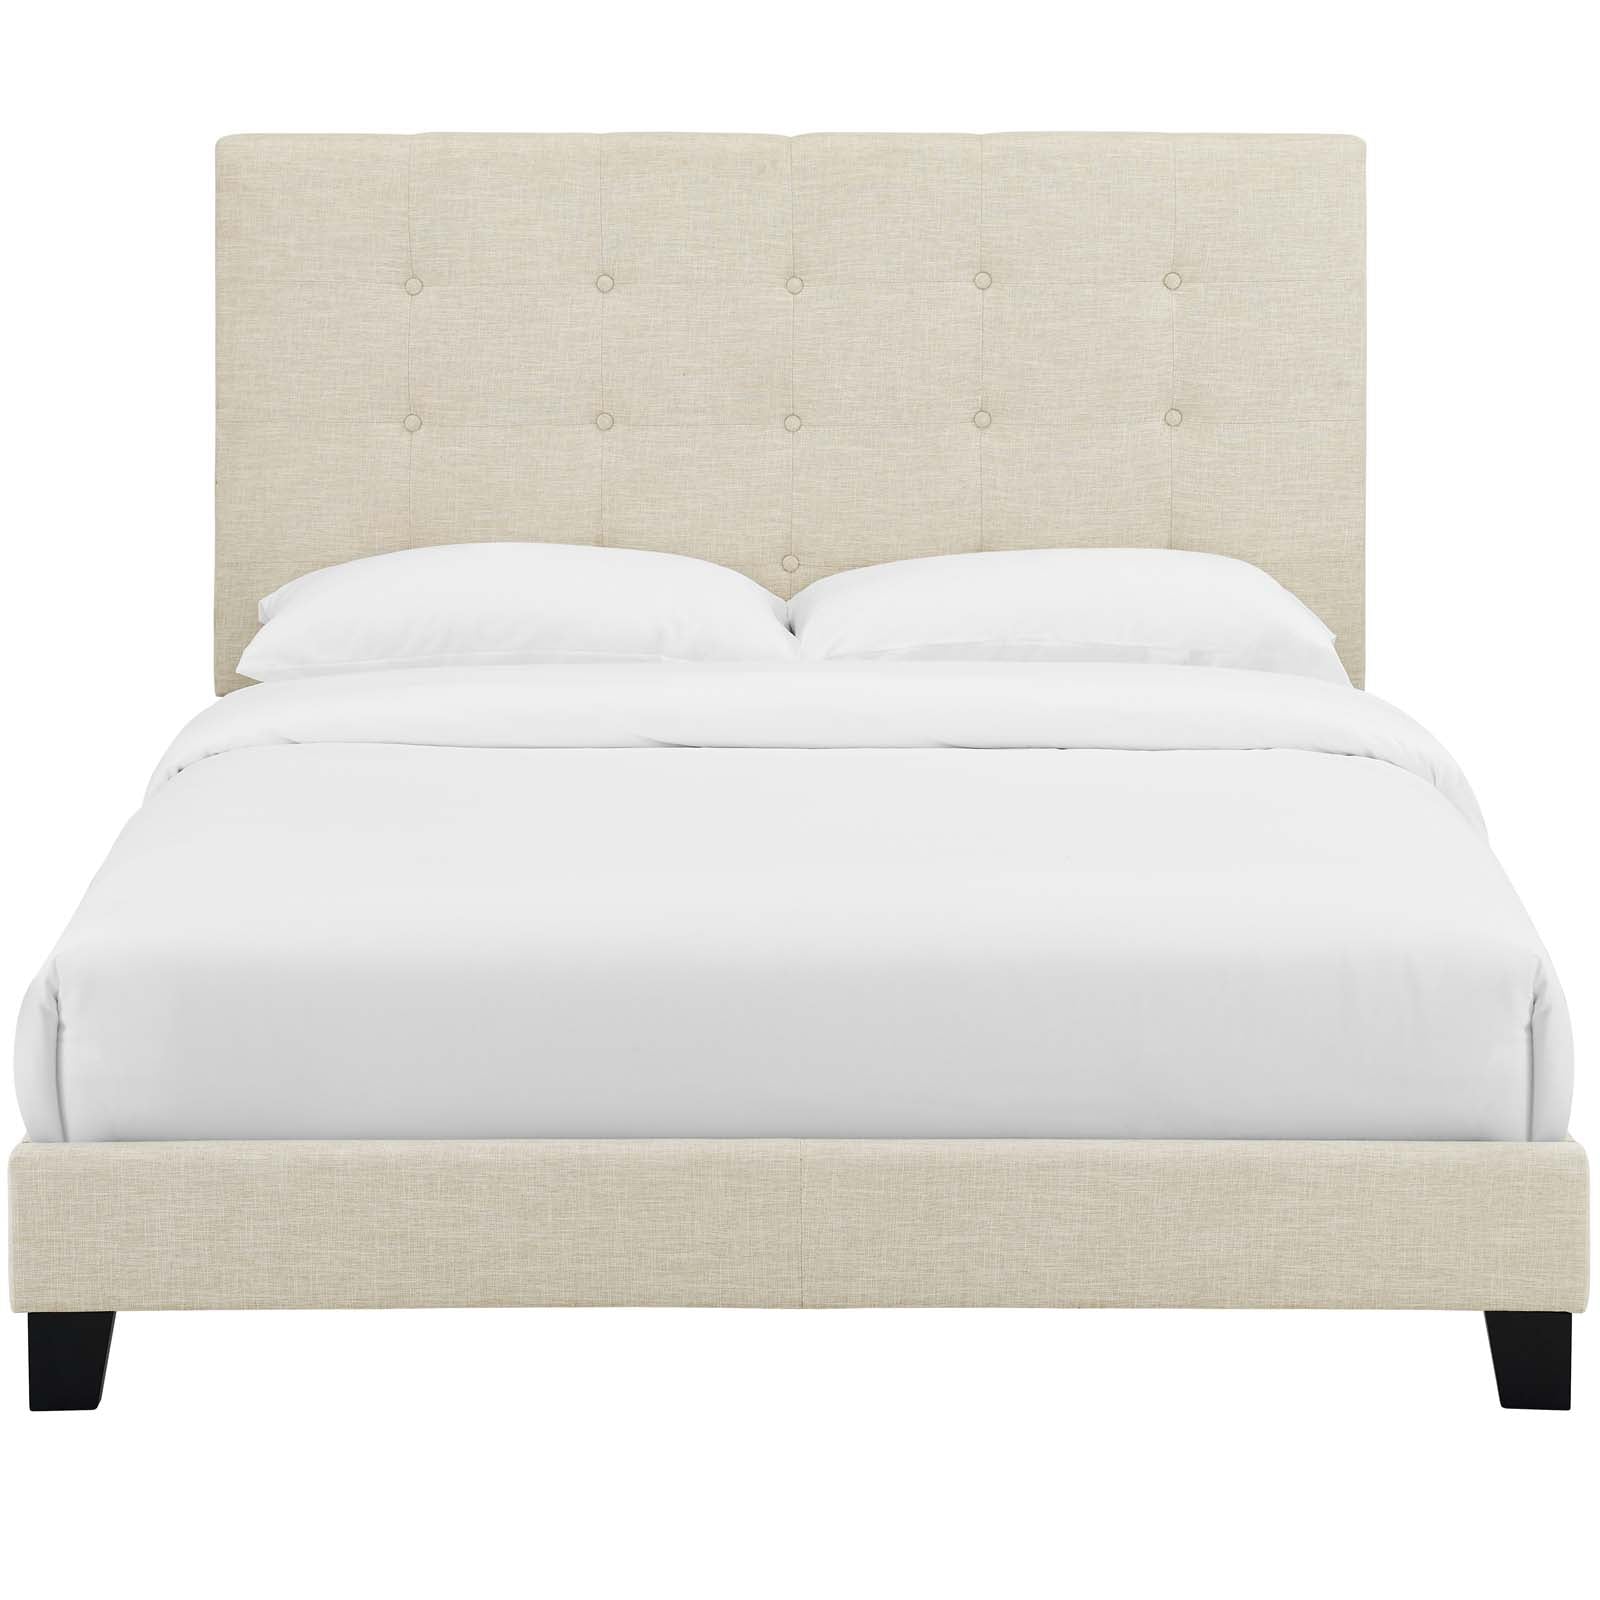 Modway Beds - Melanie Twin Tufted Button Upholstered Fabric Platform Bed Beige